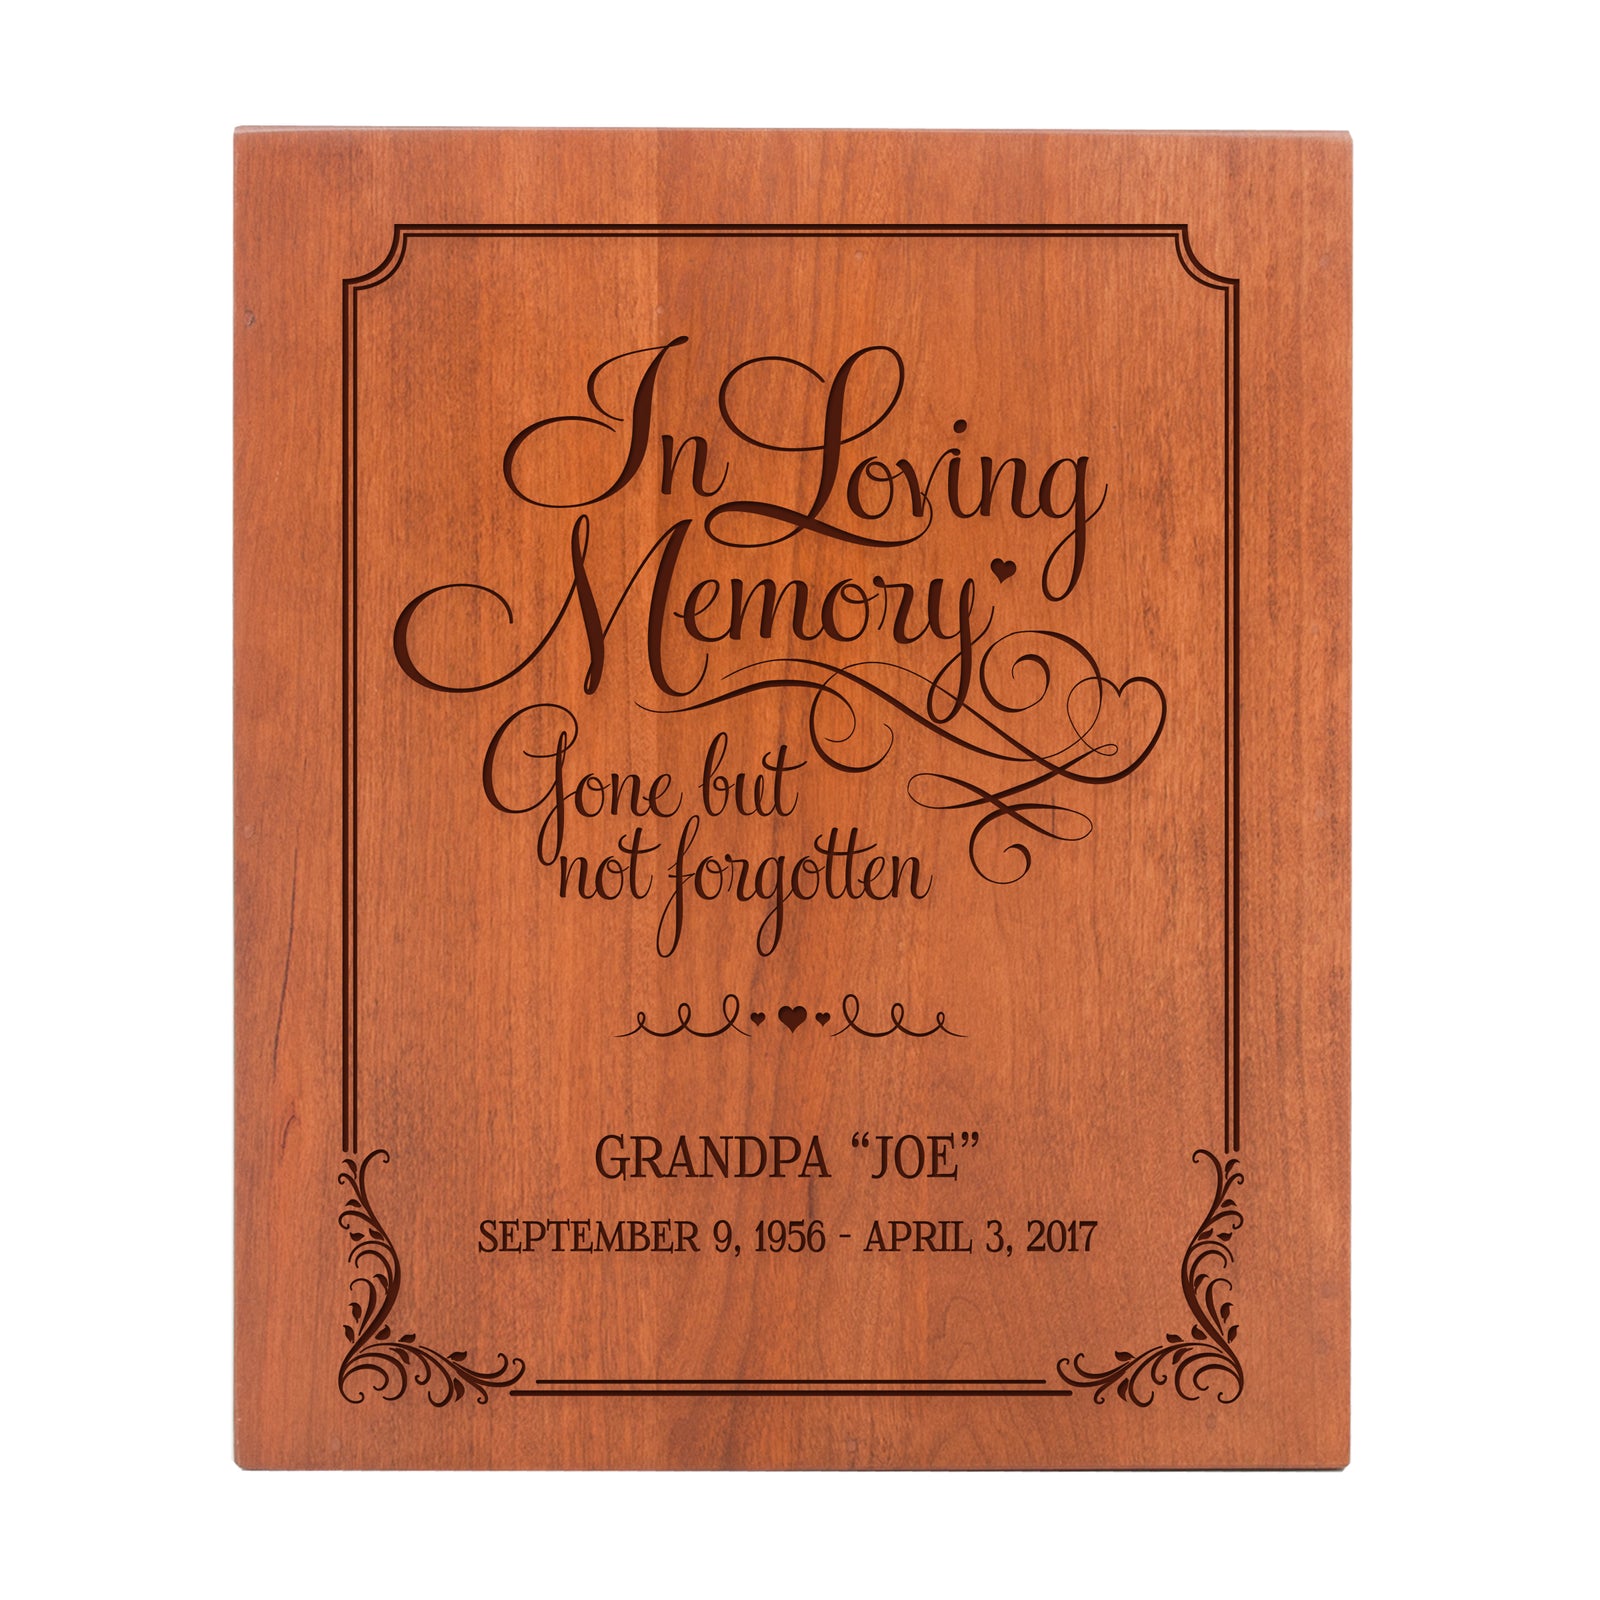 LifeSong Milestones Personalized Memorial Scattering Cremation Urn for Human Ashes Bereavement Remembrance Funeral Sympathy Keepsake Box for Loss of Loved One - Spread Ashes in the Sea Water Ocean - Holds 215 Cubic Inches of Ashes 8.25” x 10.25”